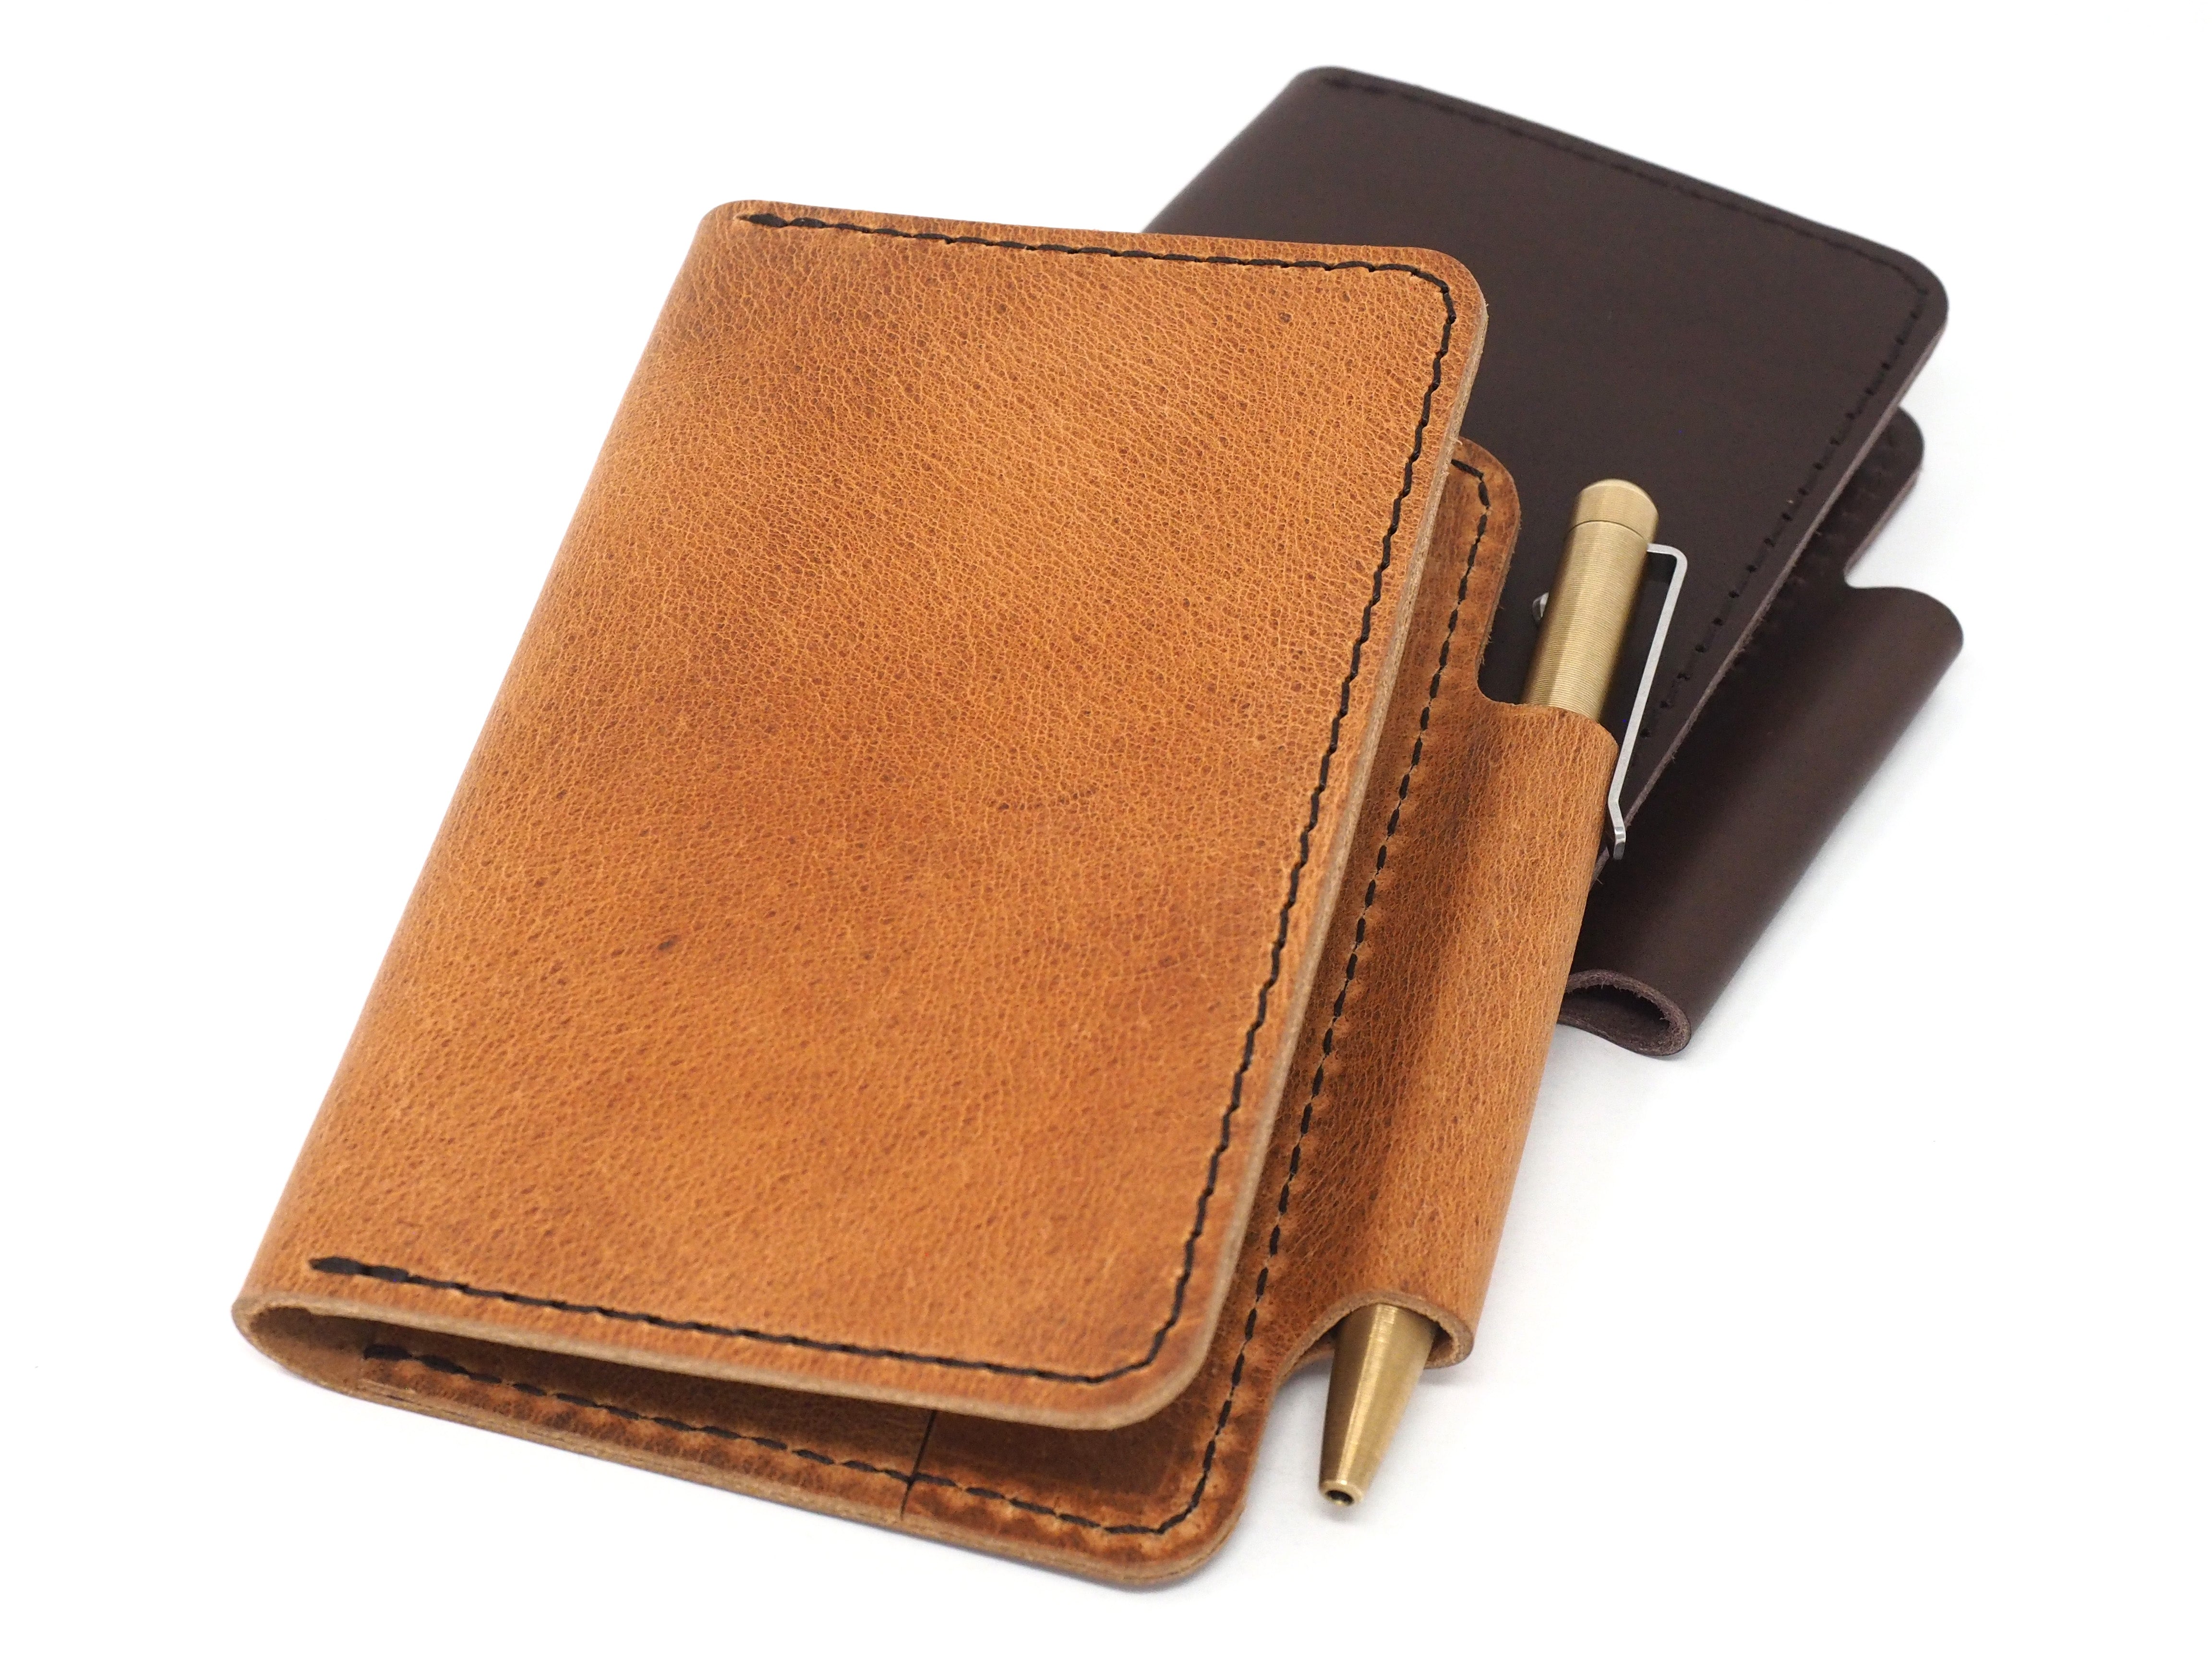 Leather Passport Holder / Field Notes Cover Tobacco Snakebite Brown